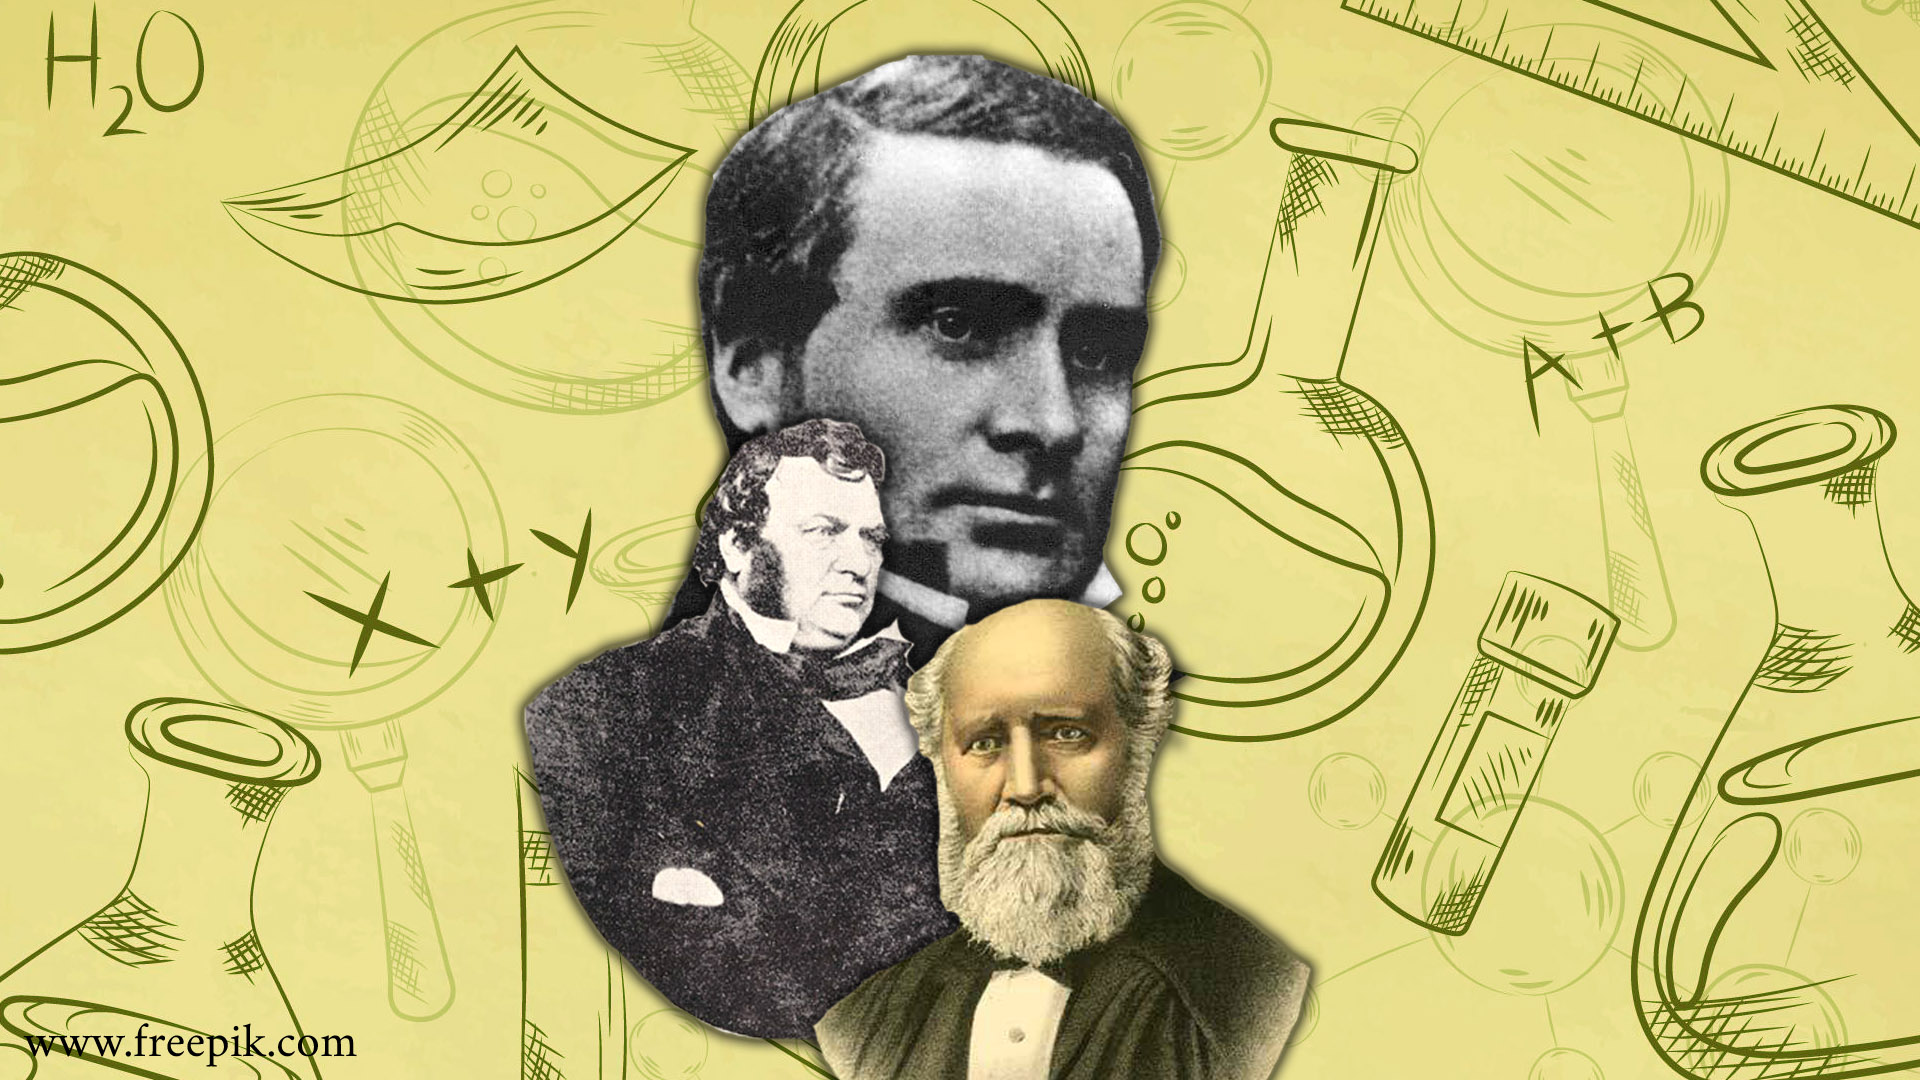 JANUARY 21 VIRTUAL Presentation, “A Constant Atmosphere of Science” Reflections on Early New Brunswick Scientists and Innovation 7 pm, Thursday, January 21, 2021 VIA Zoom Contact us for the ZOOM Link